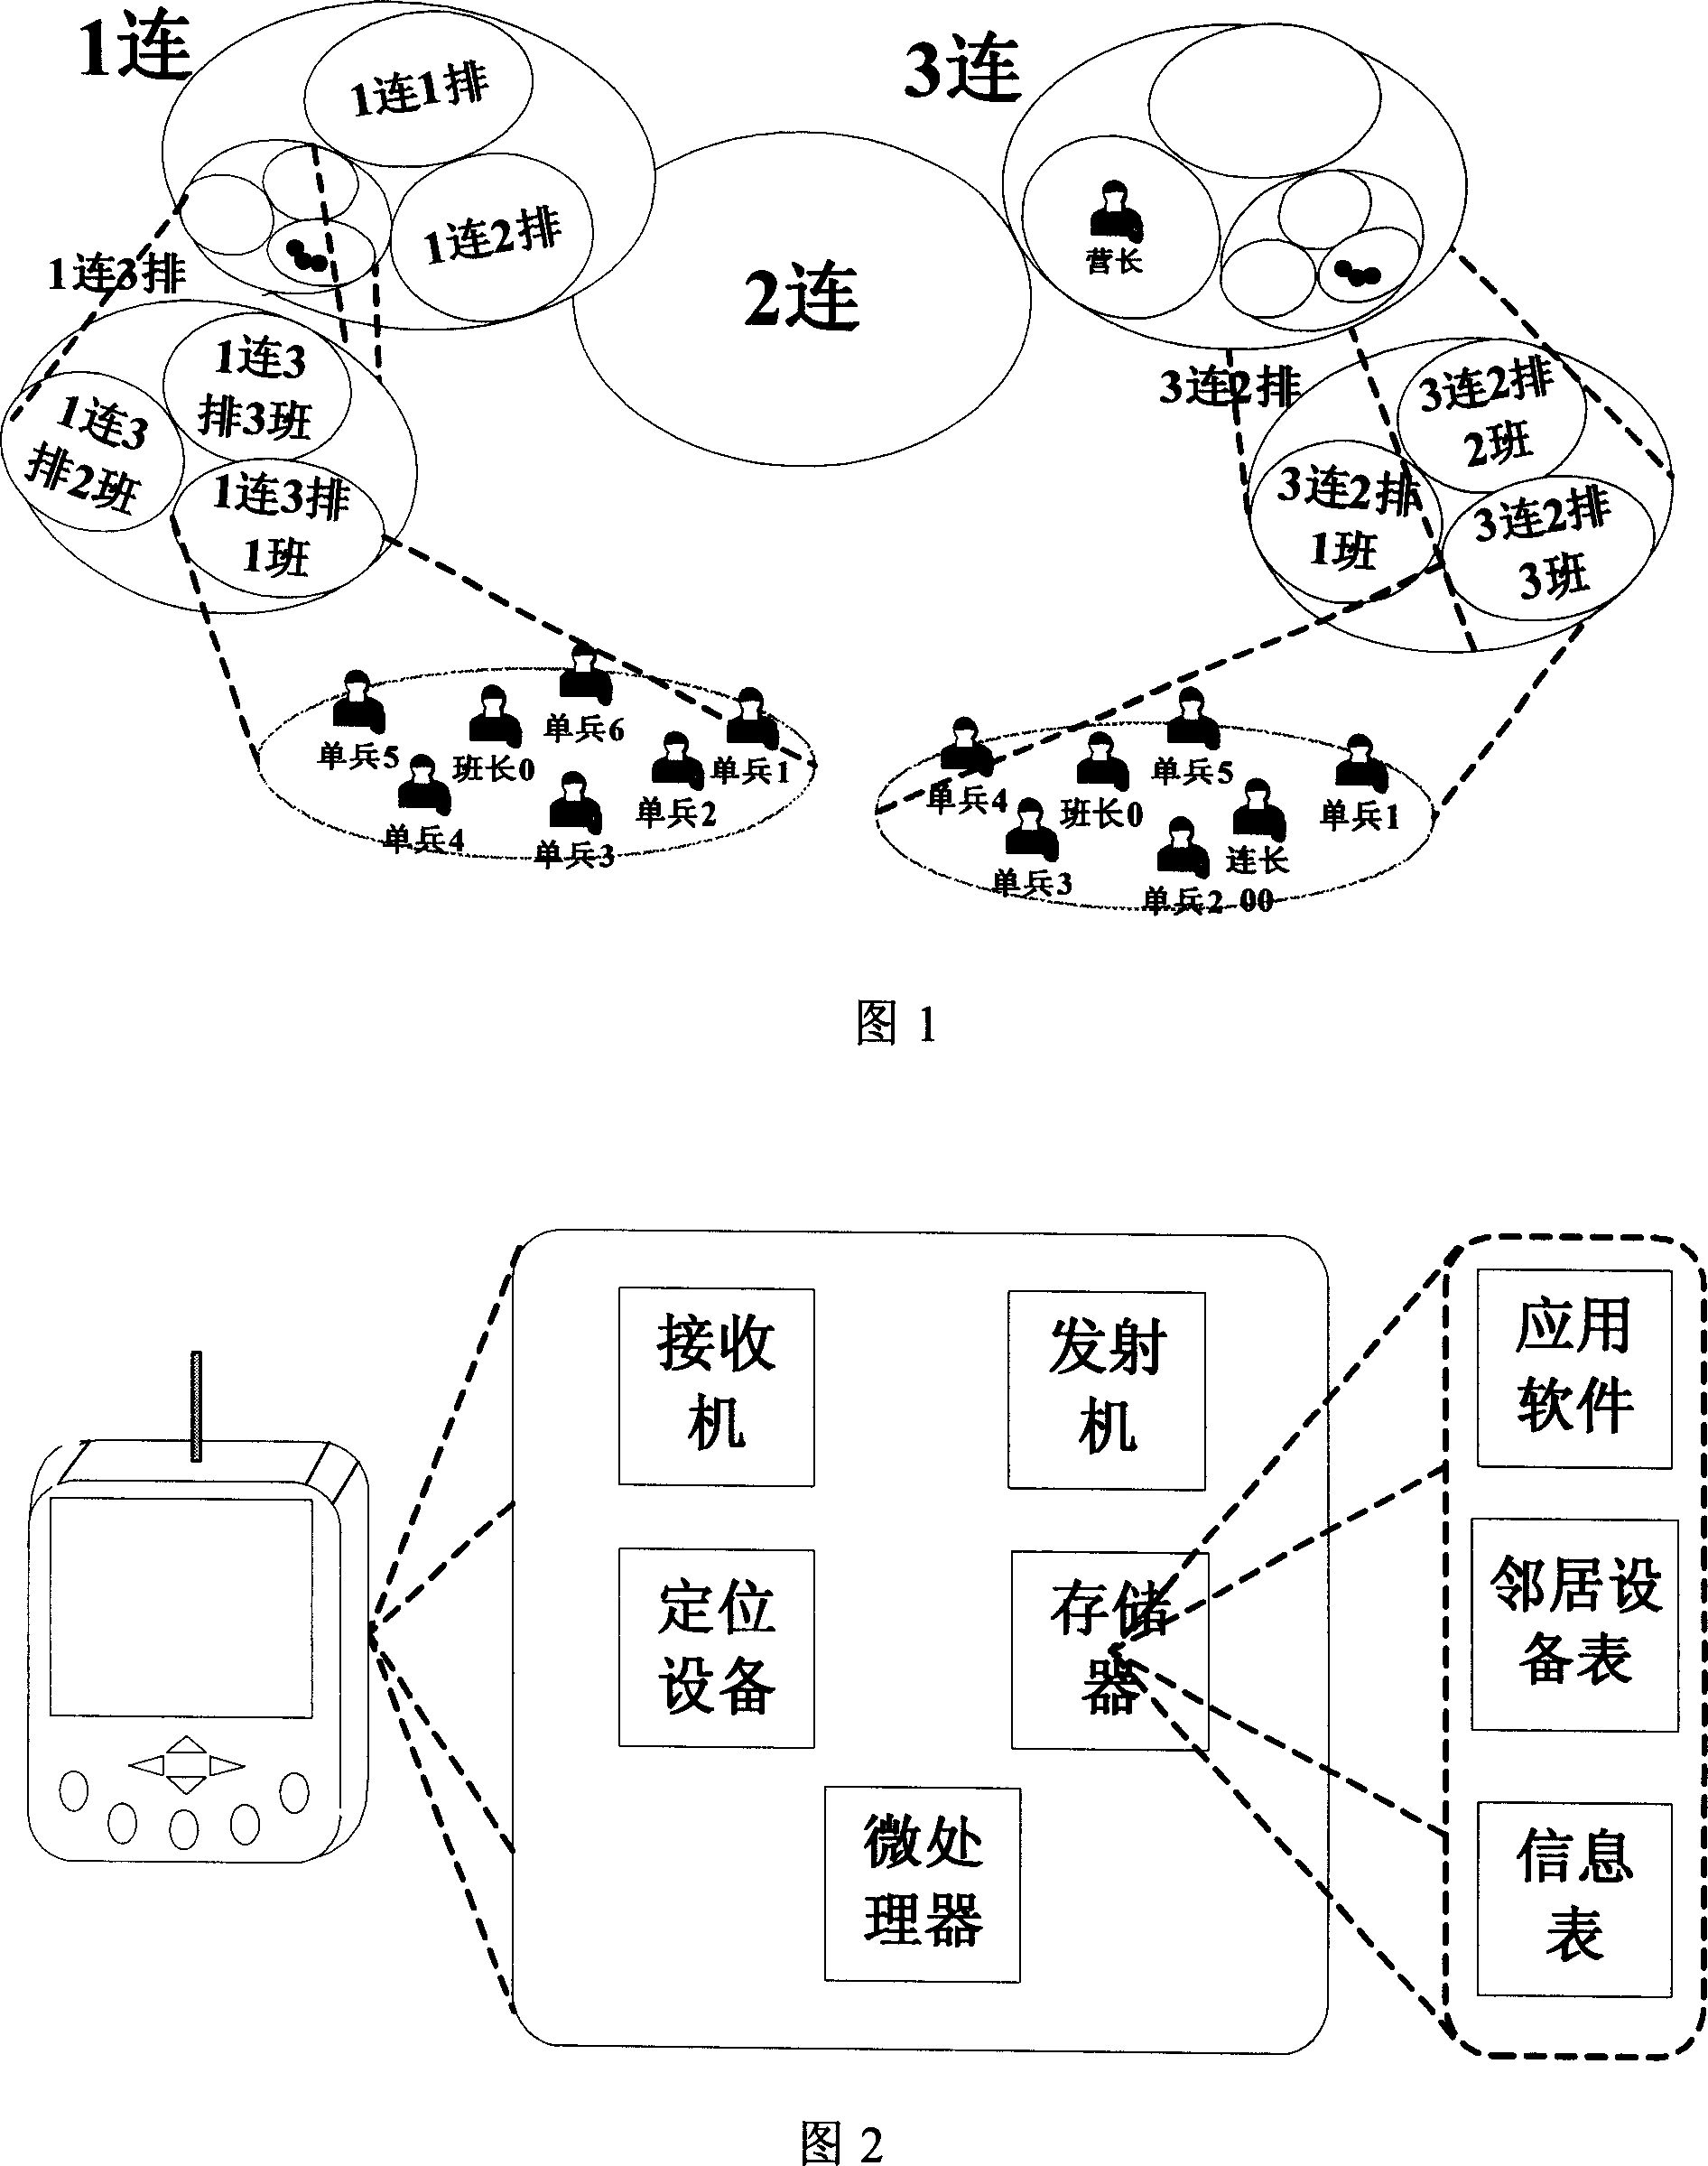 Highly dynamic radio router and routing method for constructing non IP network with location assistance